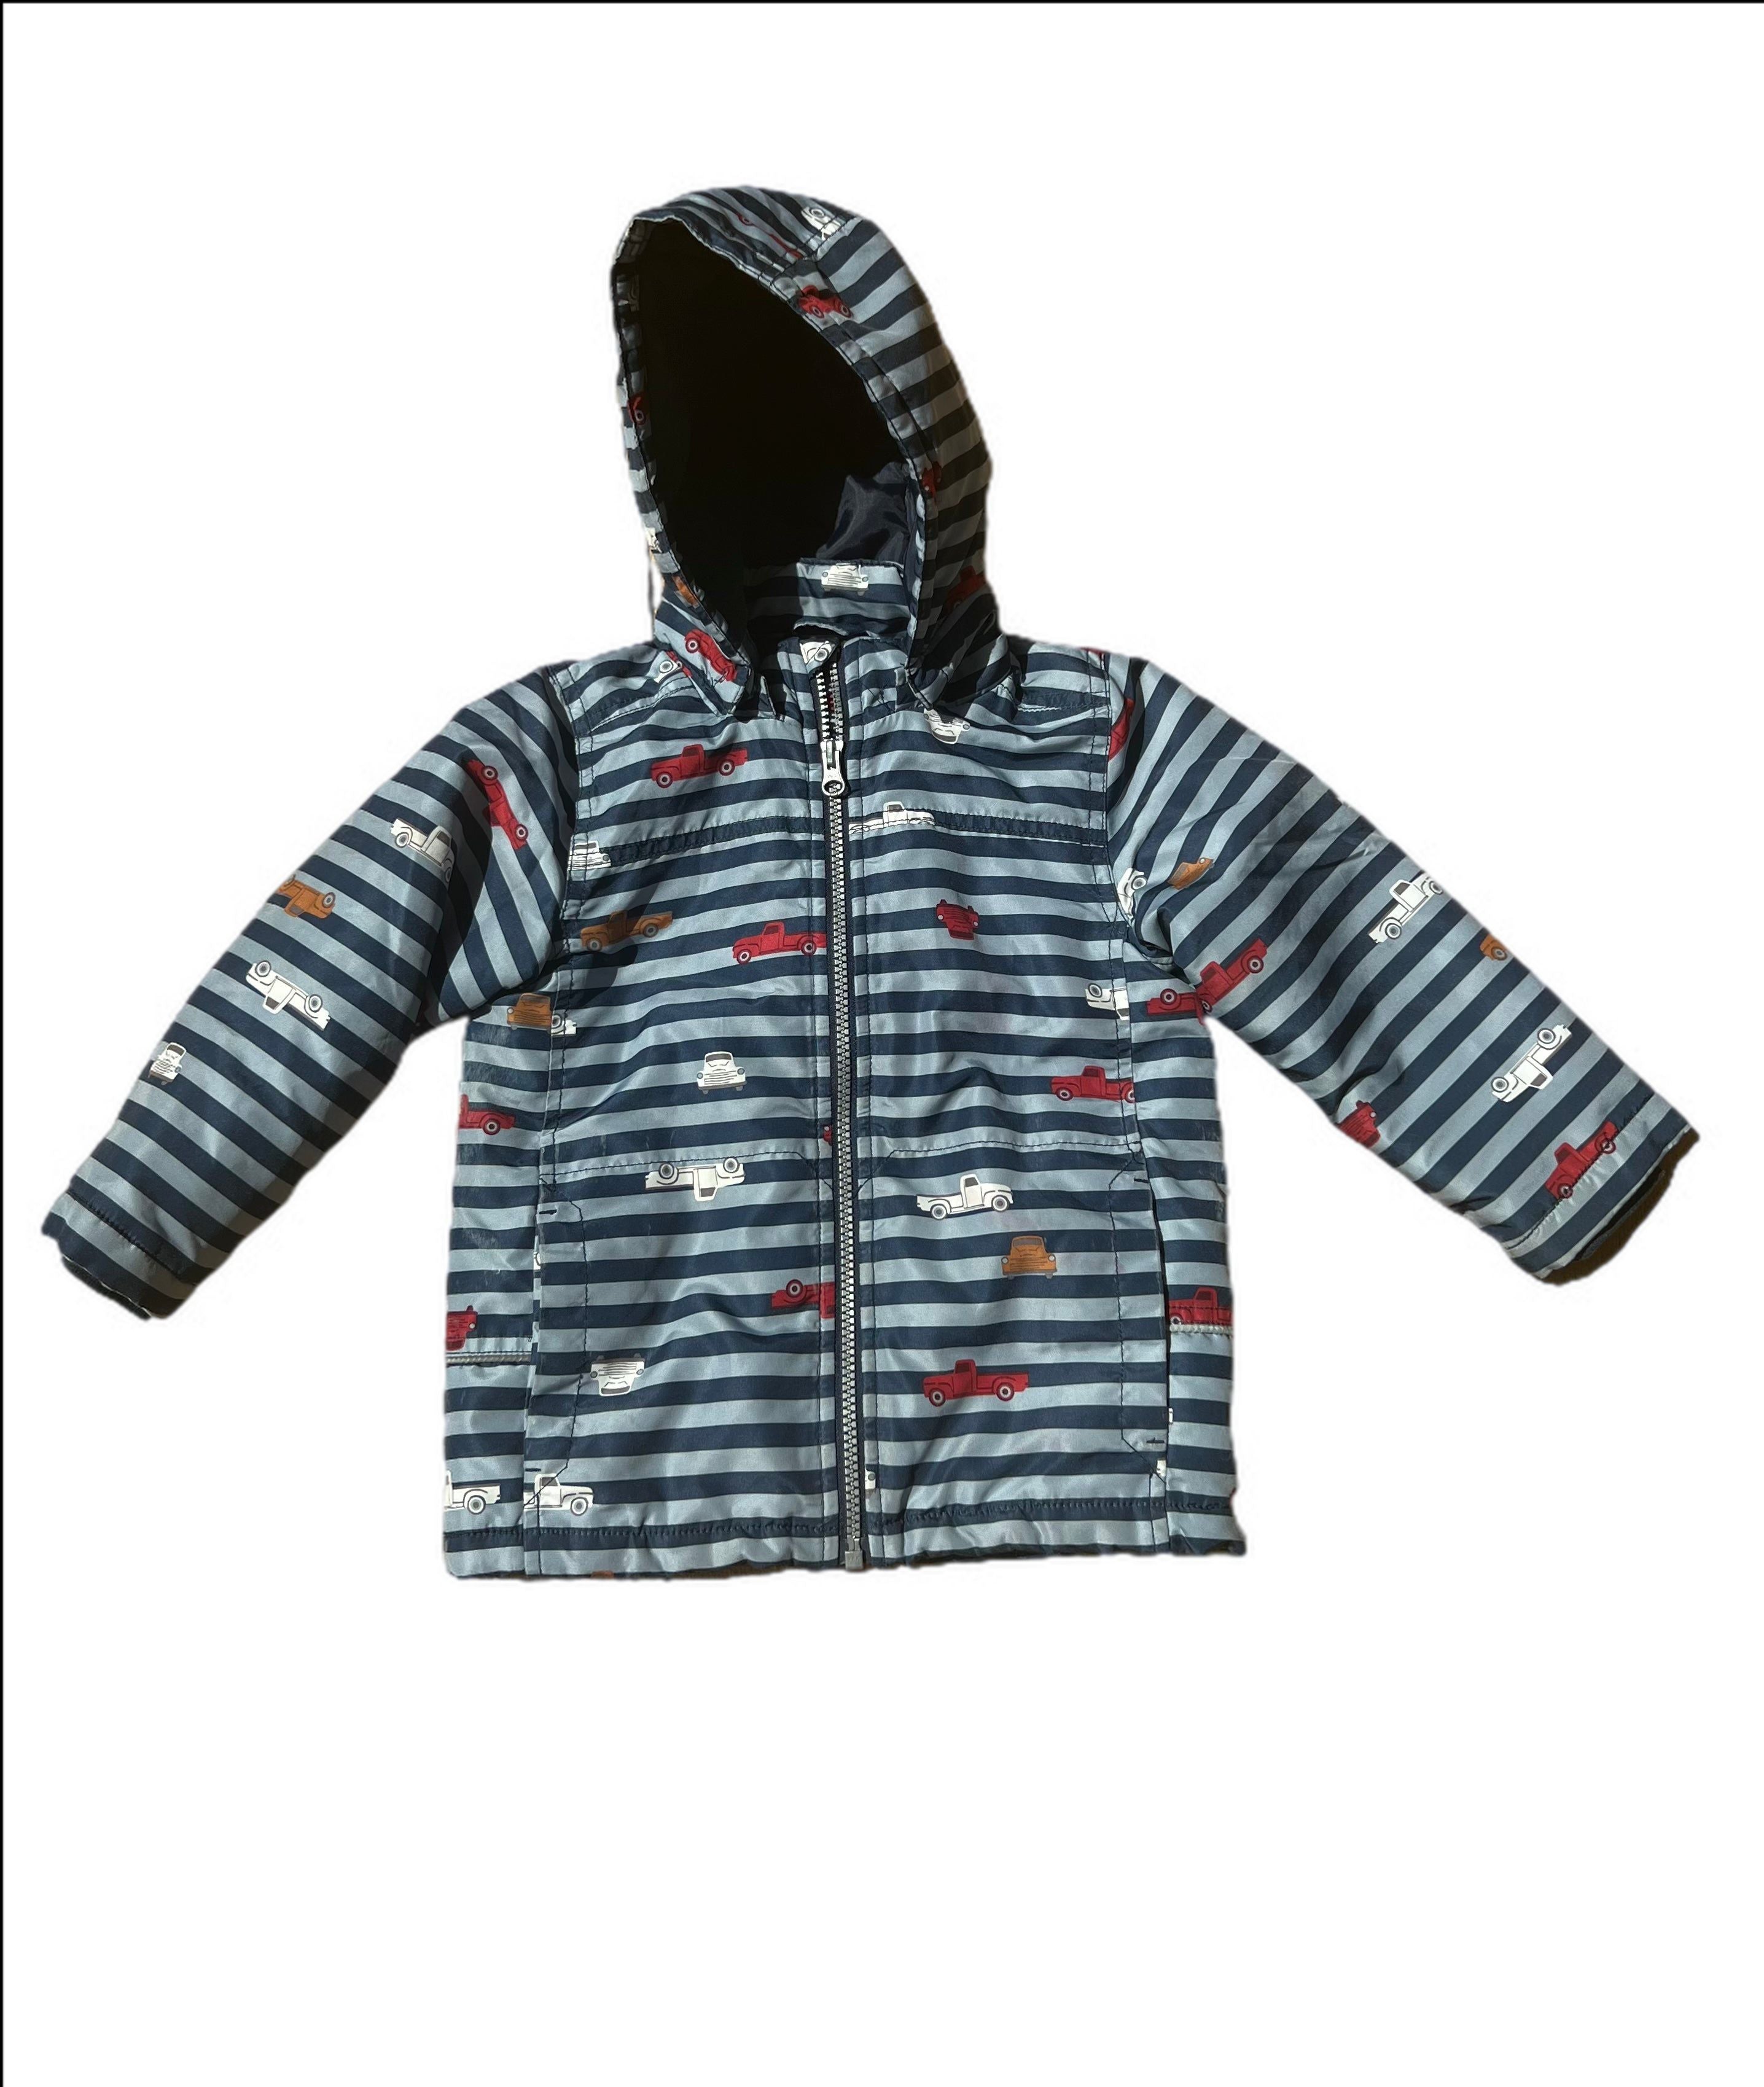 Hooded pick up truck jacket